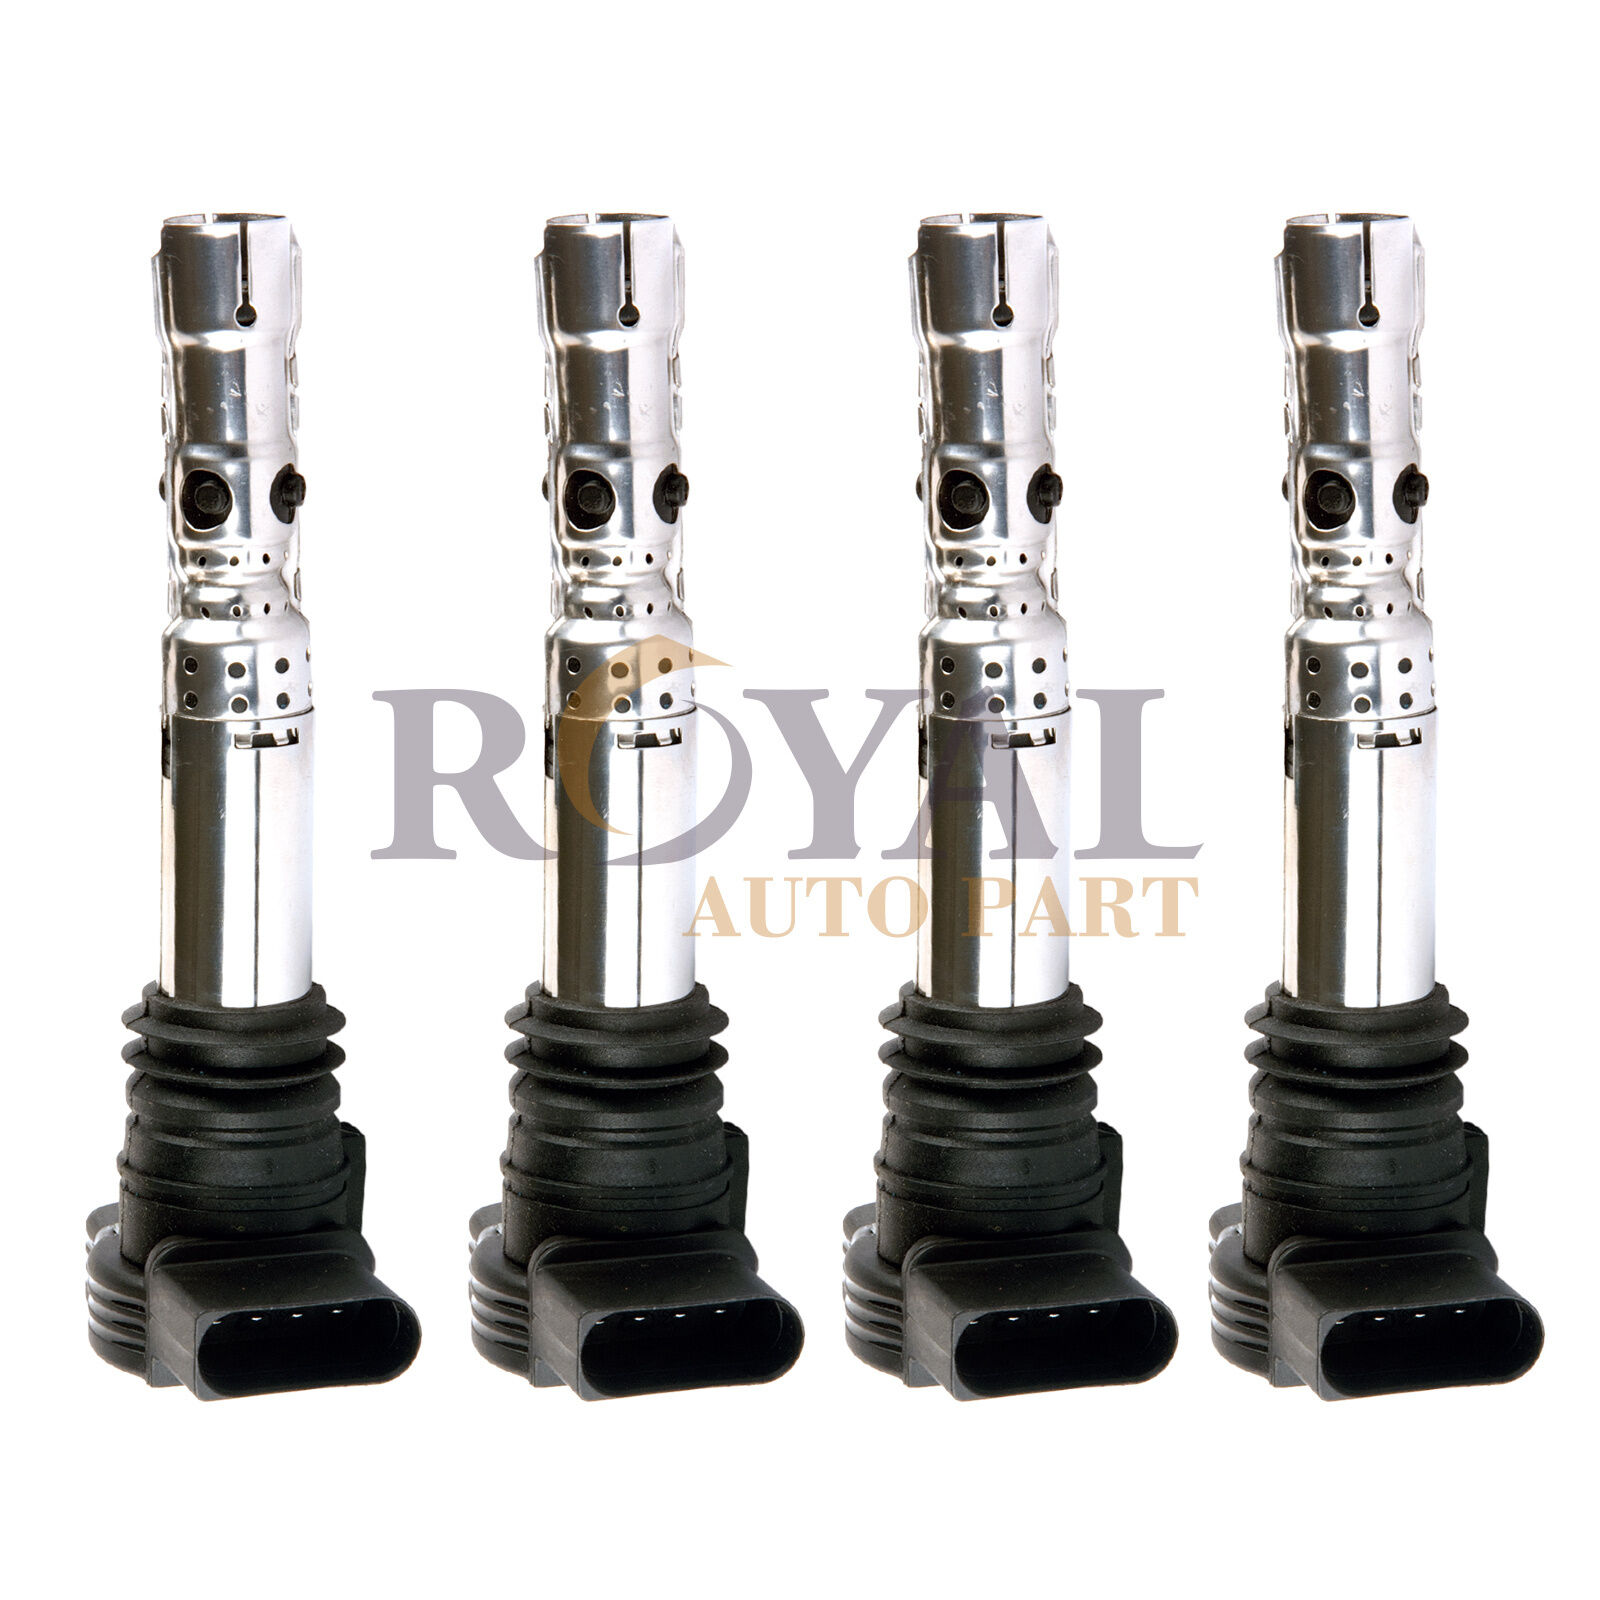 Pack of 4 Ignition Coils for Volkswagen Beetle Golf Jetta Passat AUDI  A4 UF411